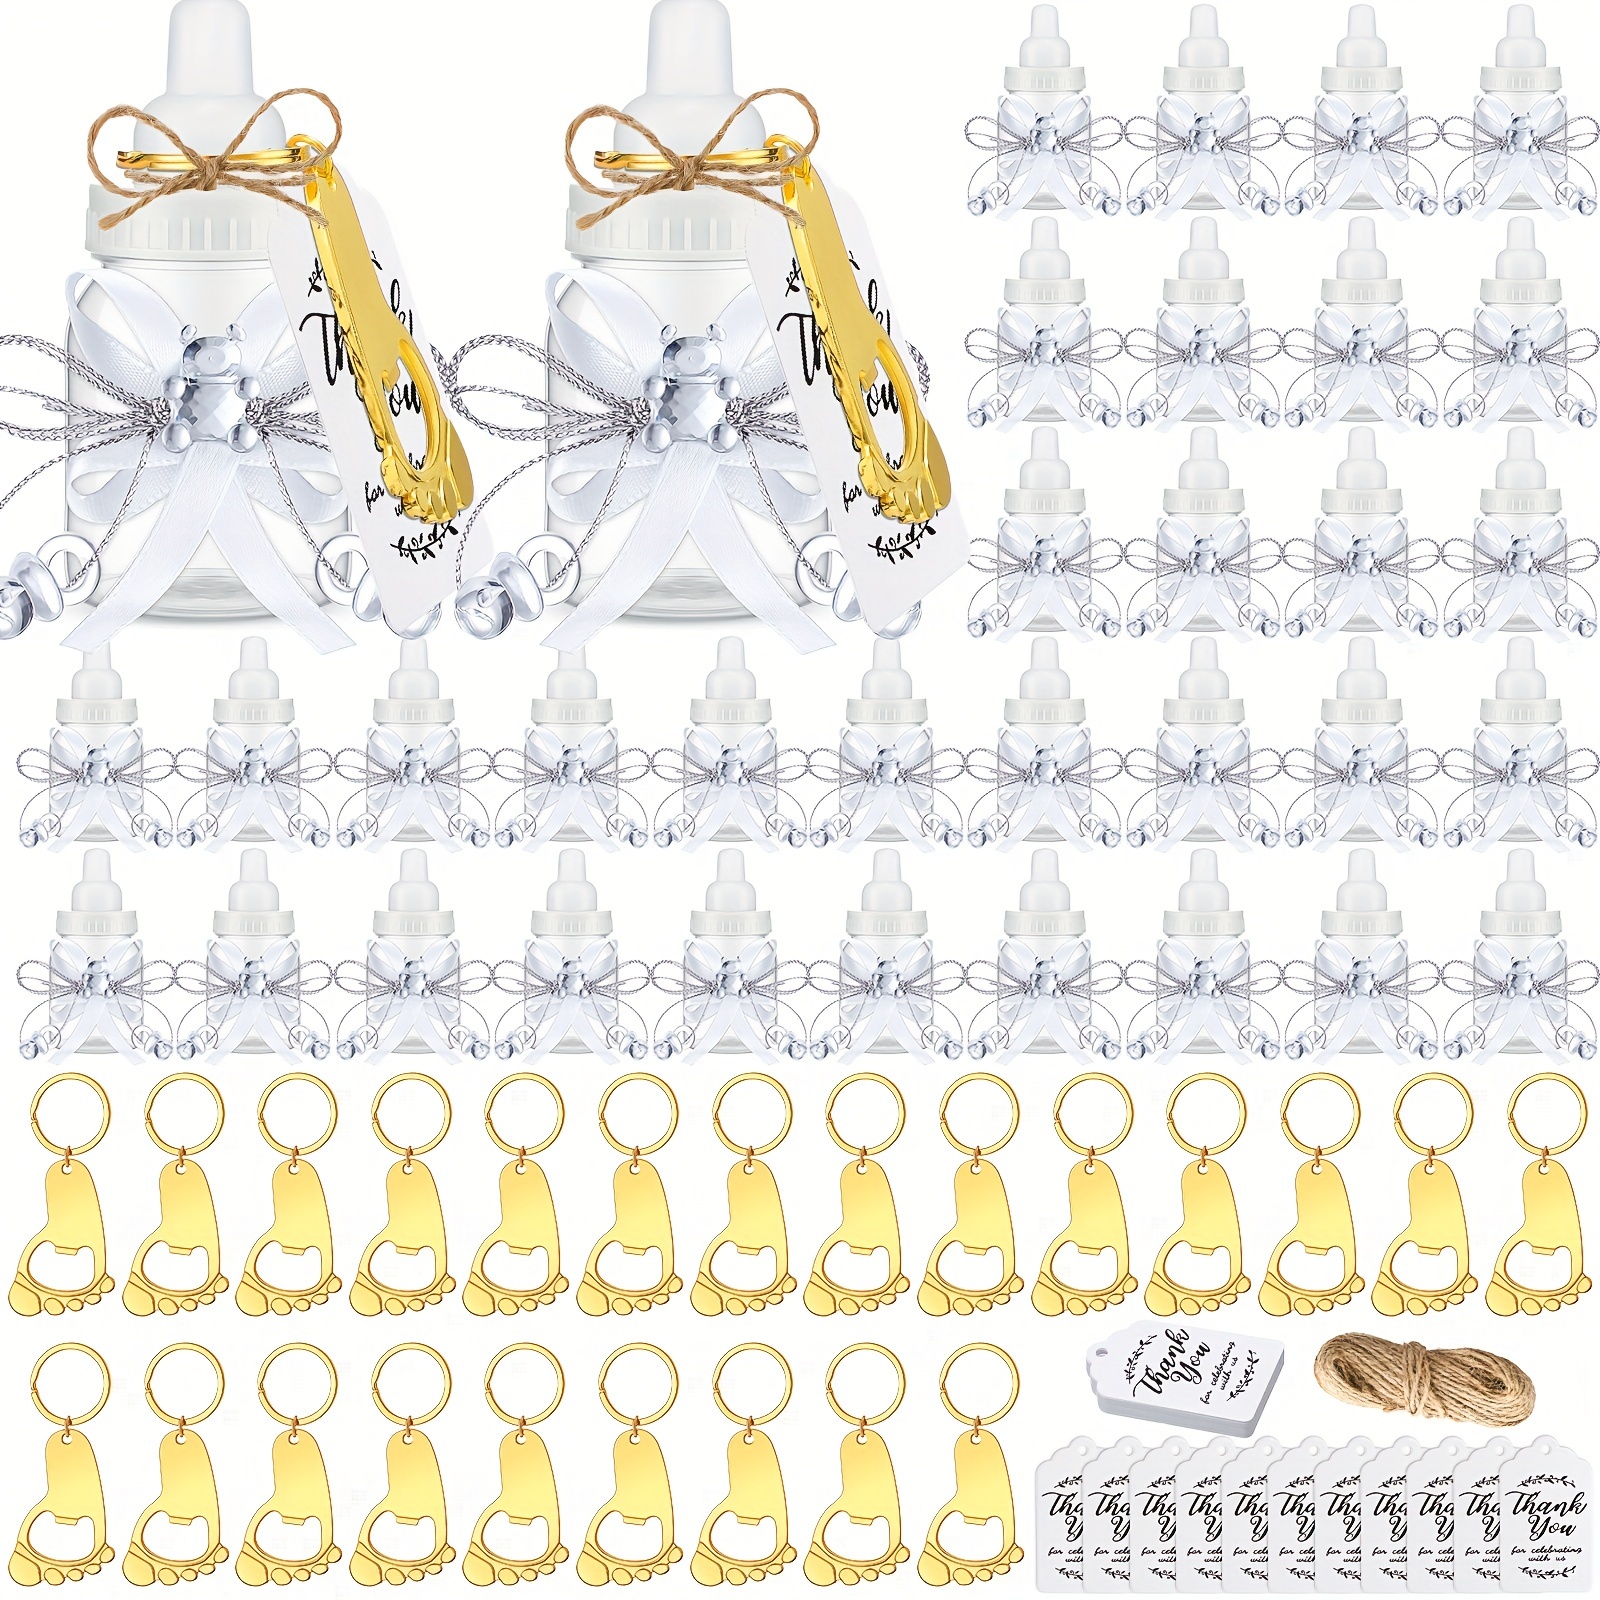 

150 Pcs Baby Shower Party Gift Bottles Games 50 Mini Milk Baby Bottles 50 Footprint Bottle Openers 50 Thank You Tag For Girl Boy Baby Shower Party Guest Return Gifts (white, Gold)